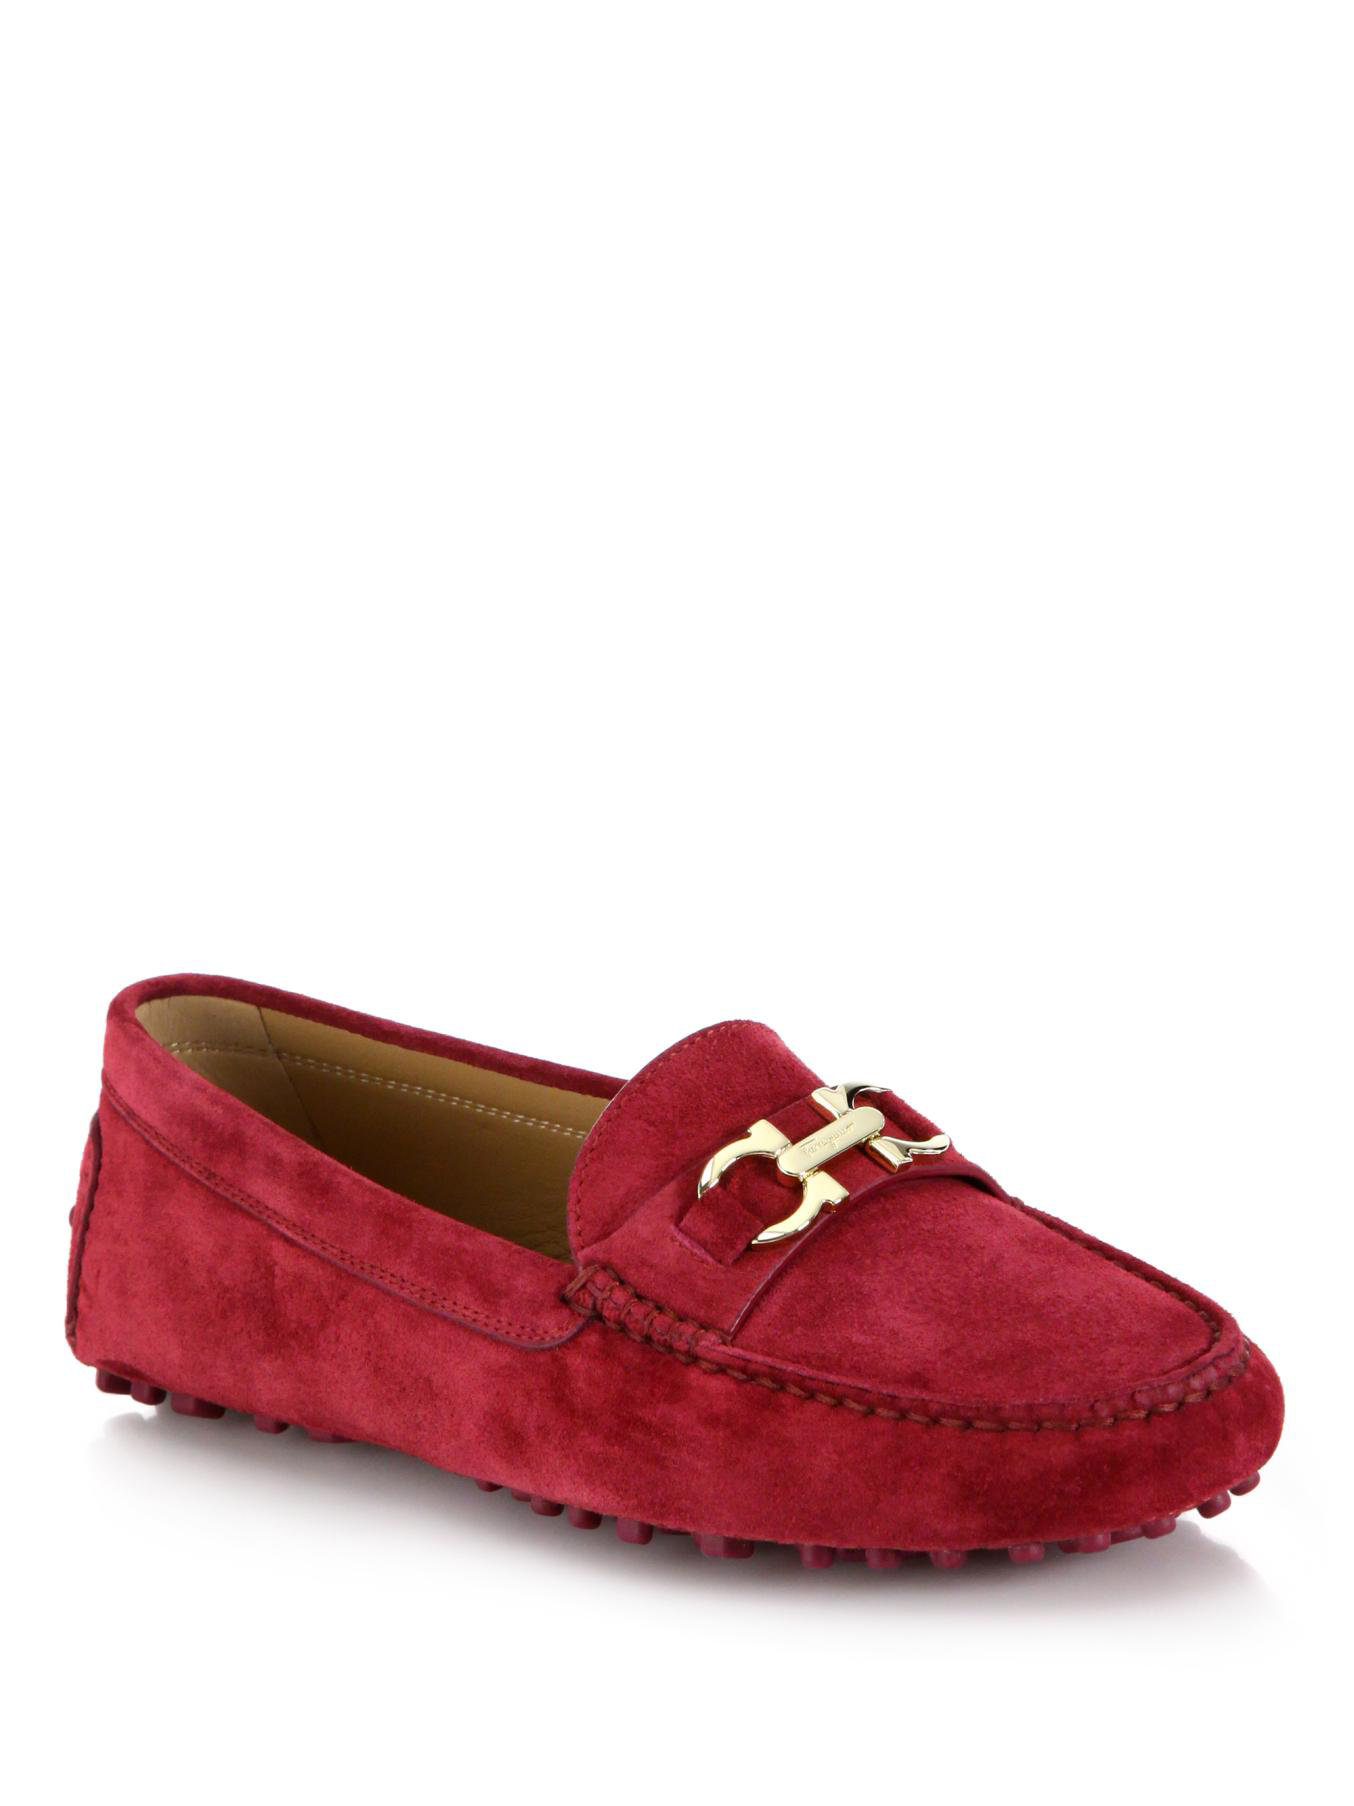 Lyst - Ferragamo Saba Suede Driving Shoes in Red